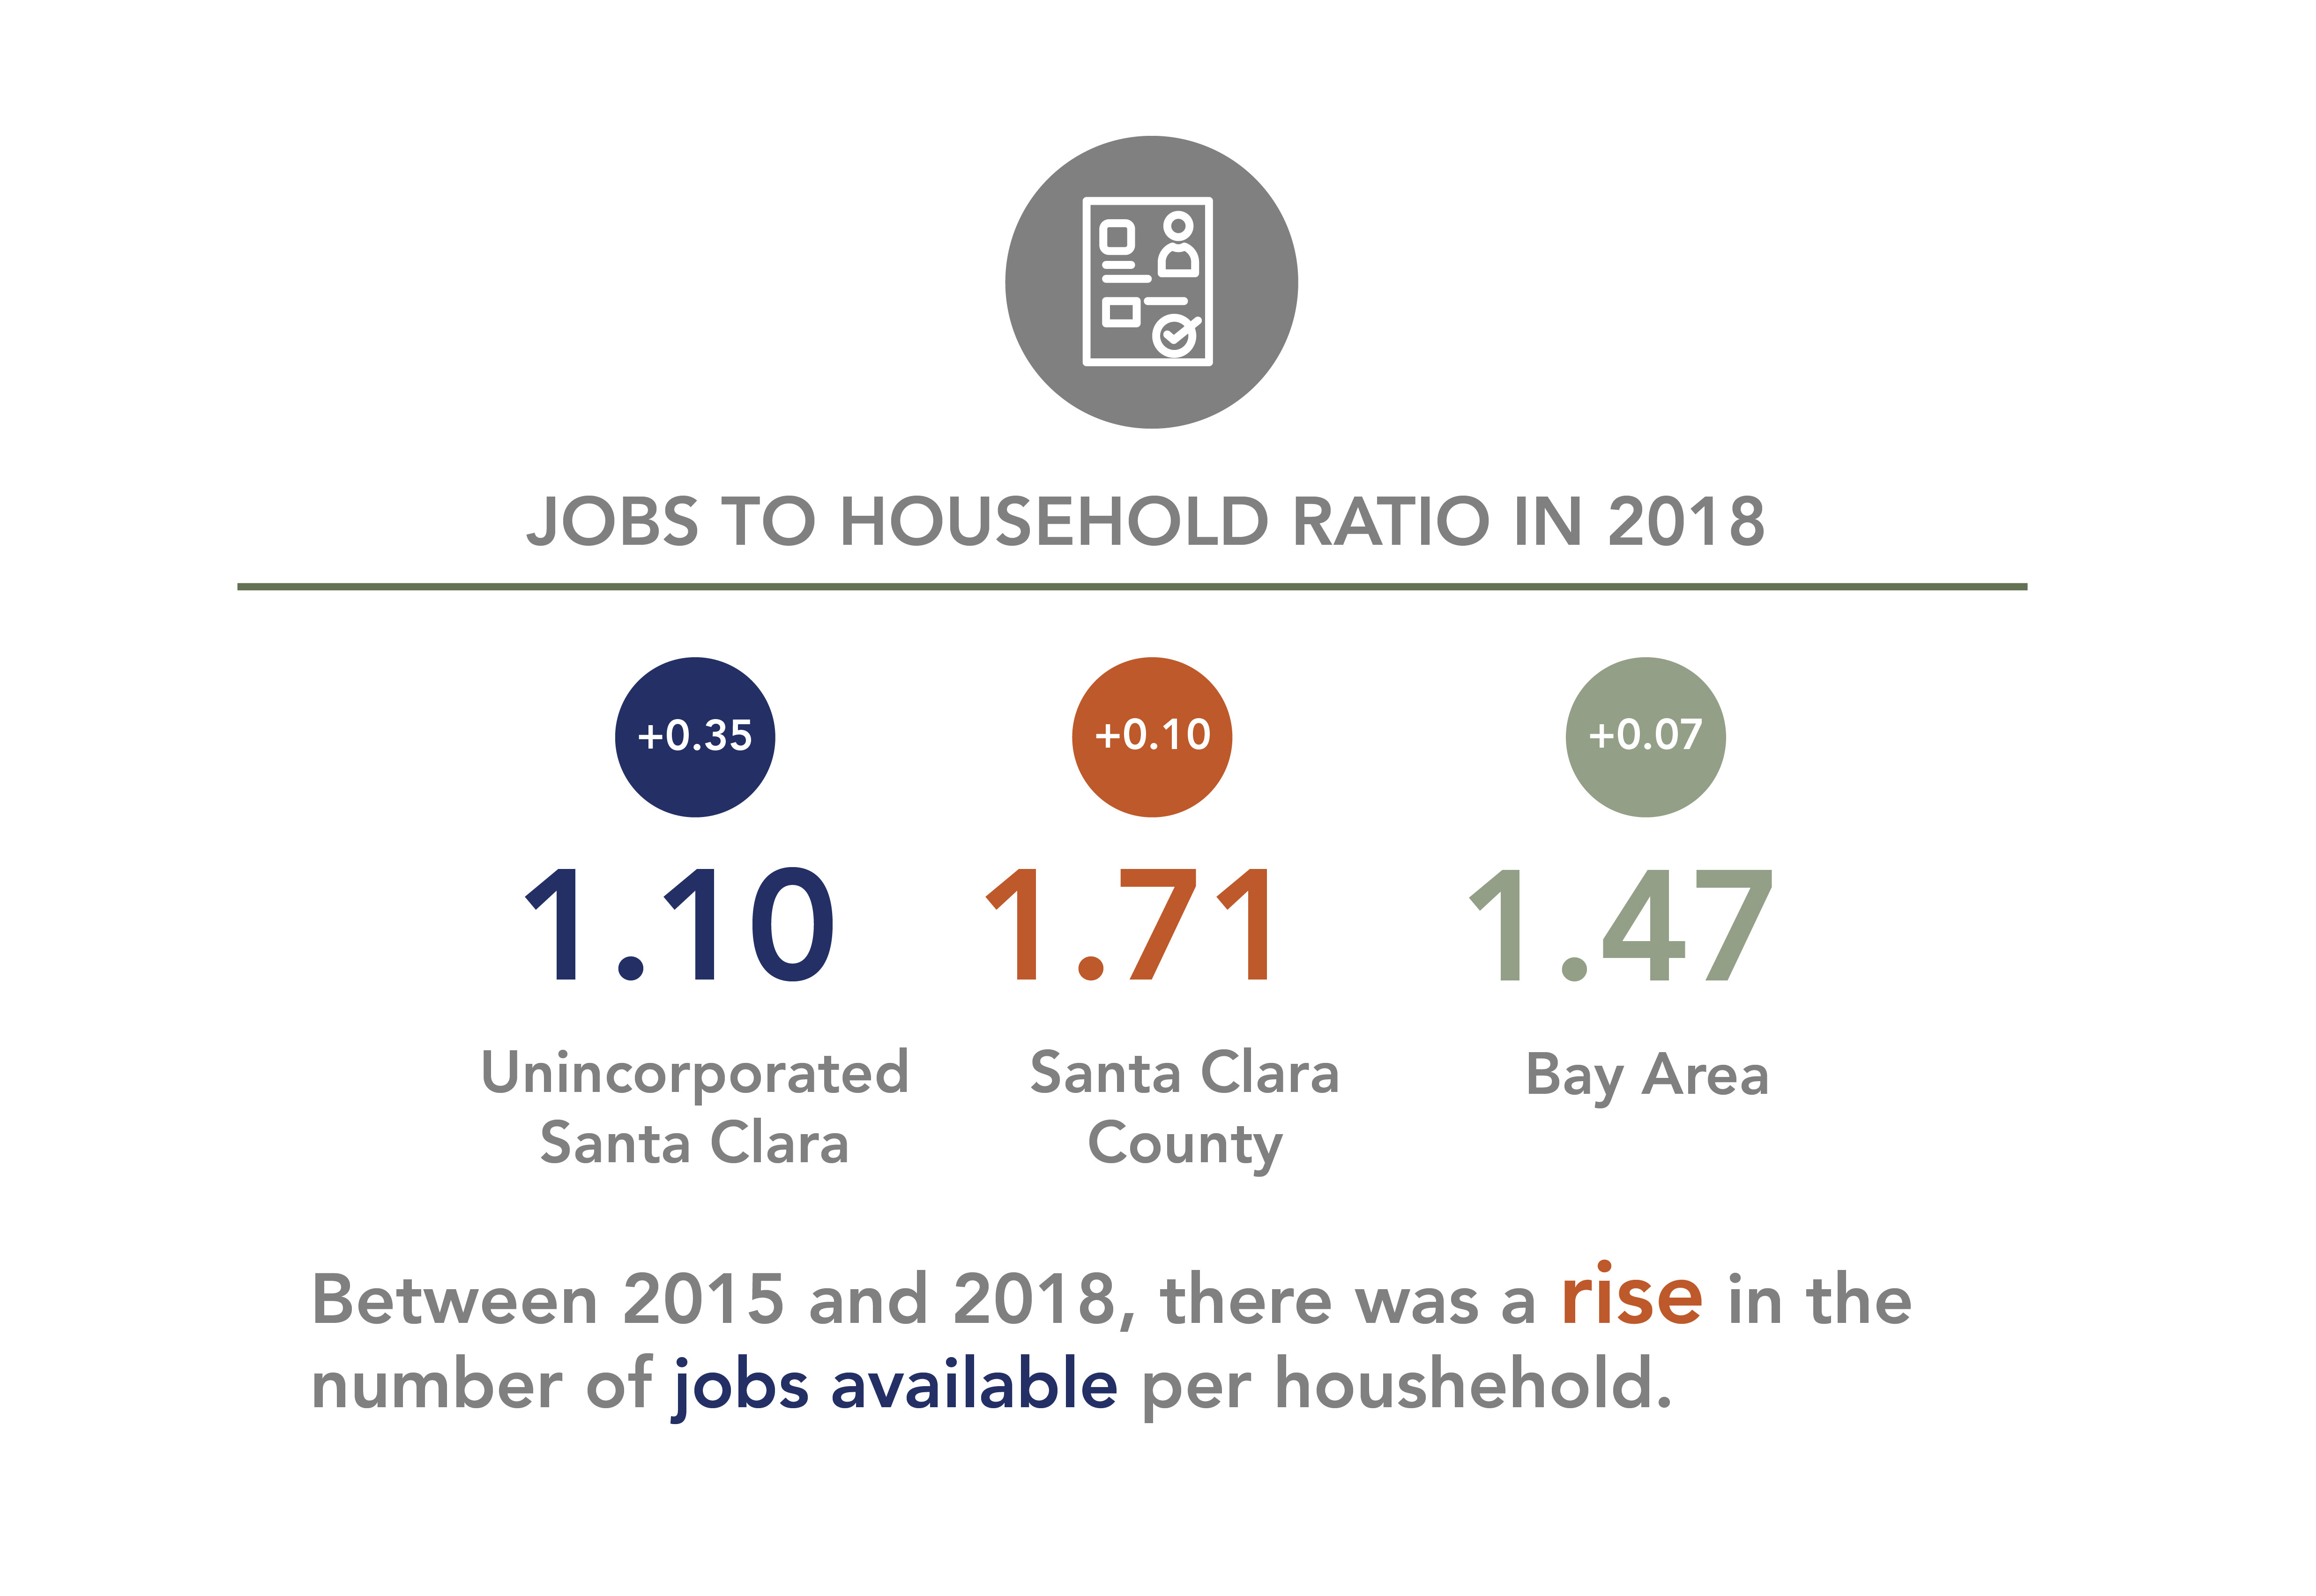 The job to household ratio is 1.10 in Unincorporated Santa Clara, 1.71 in Santa Clara County and 1.47 in the Bay Area